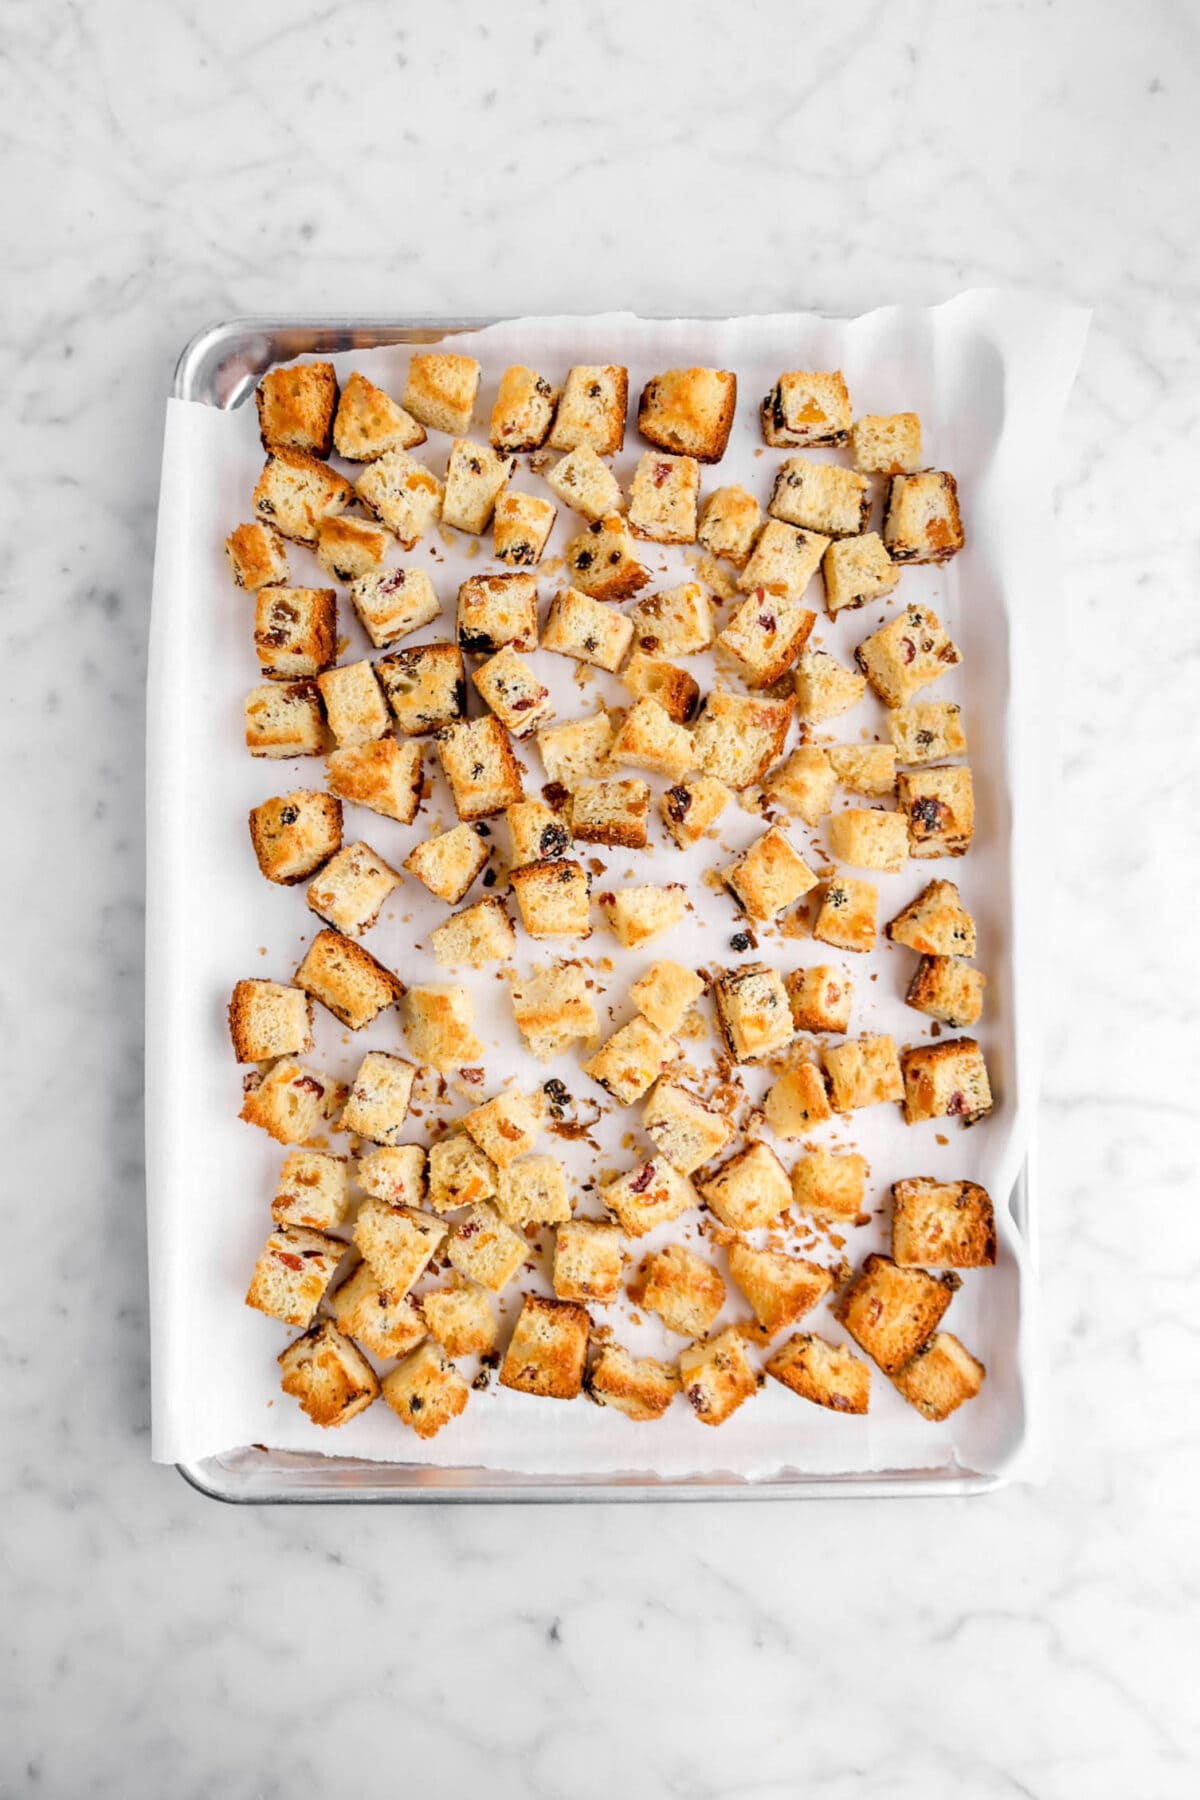 toasted cubed panettone on lined sheet pan.